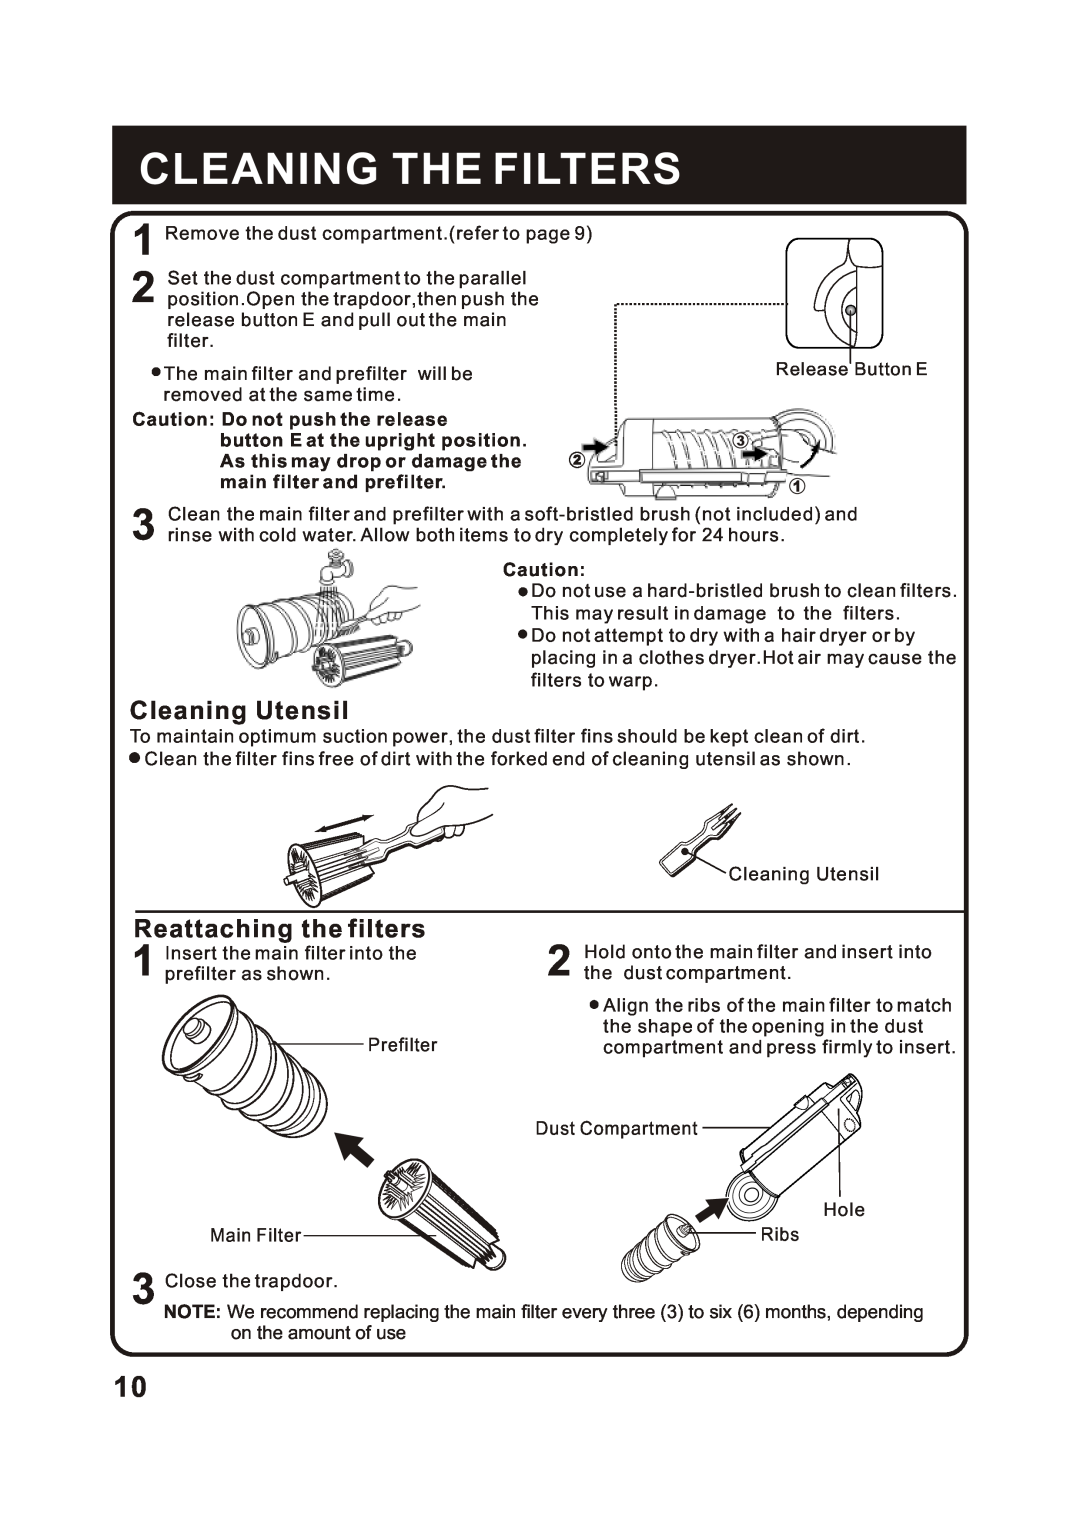 Fantom Vacuum FM743 instruction manual Cleaning The Filters, Cleaning Utensil, Reattaching the filters 